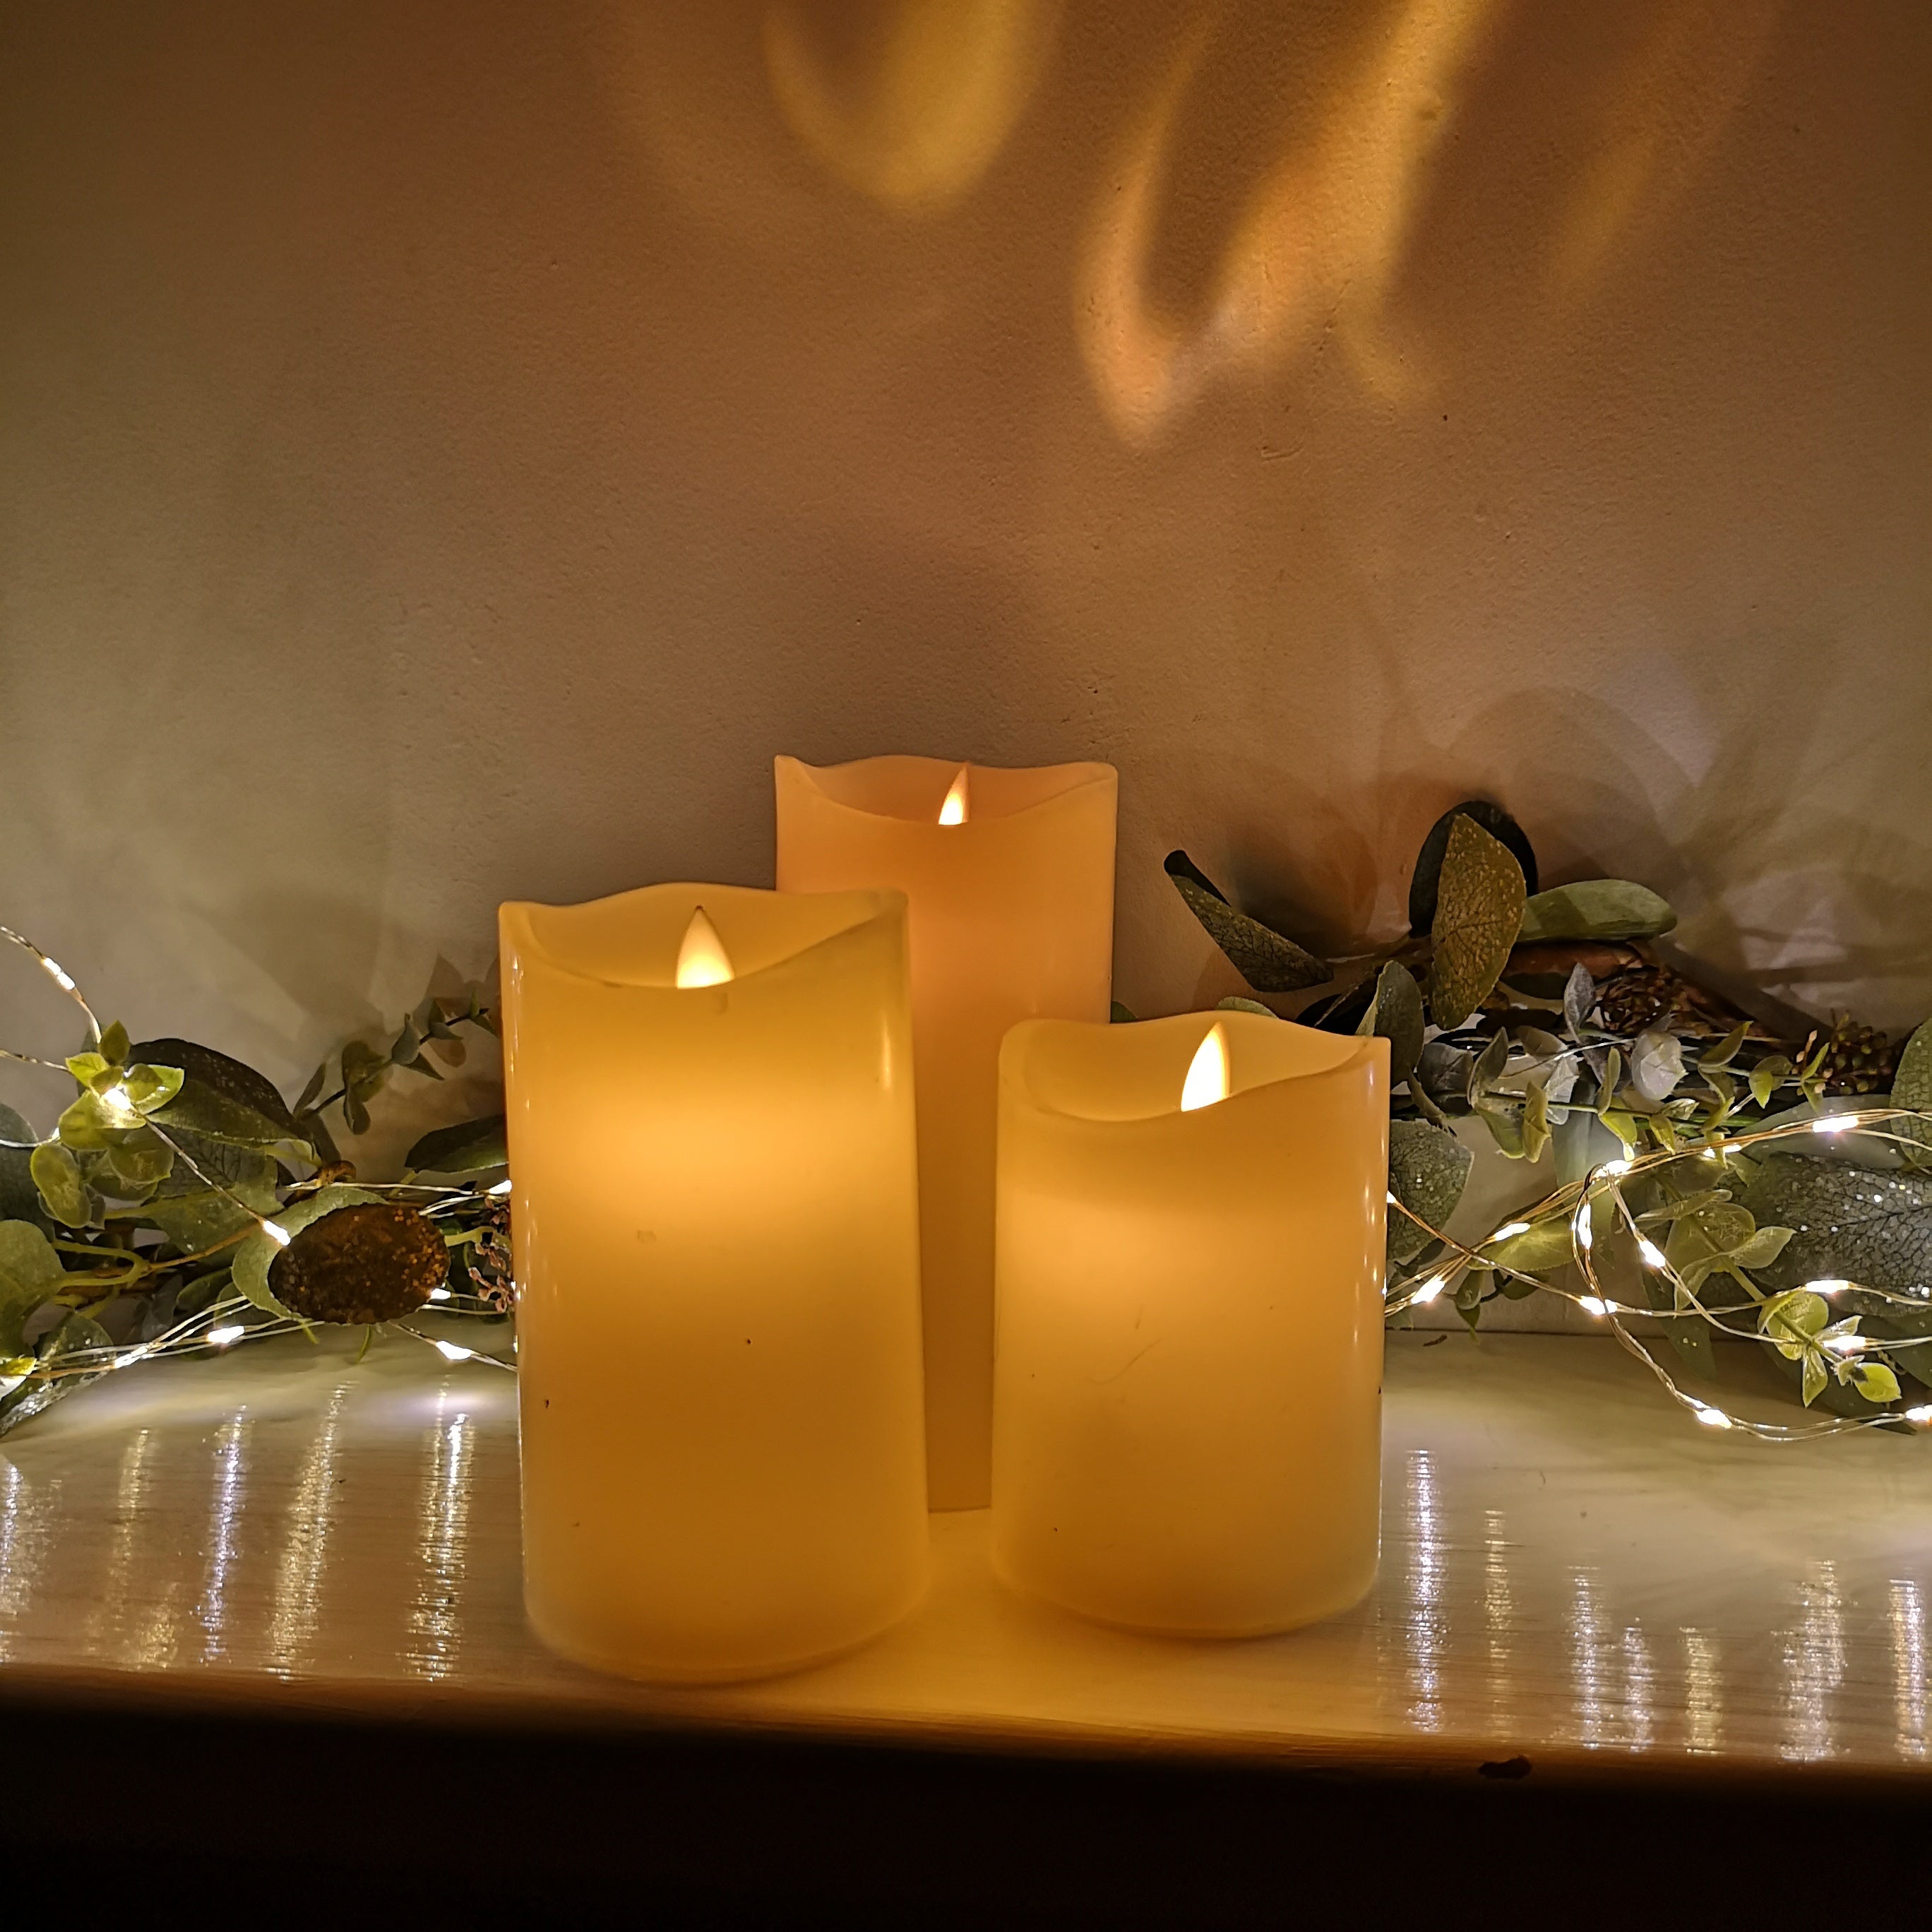 Premier Set of 3 Battery Operated Dancing Flame Candles in Cream